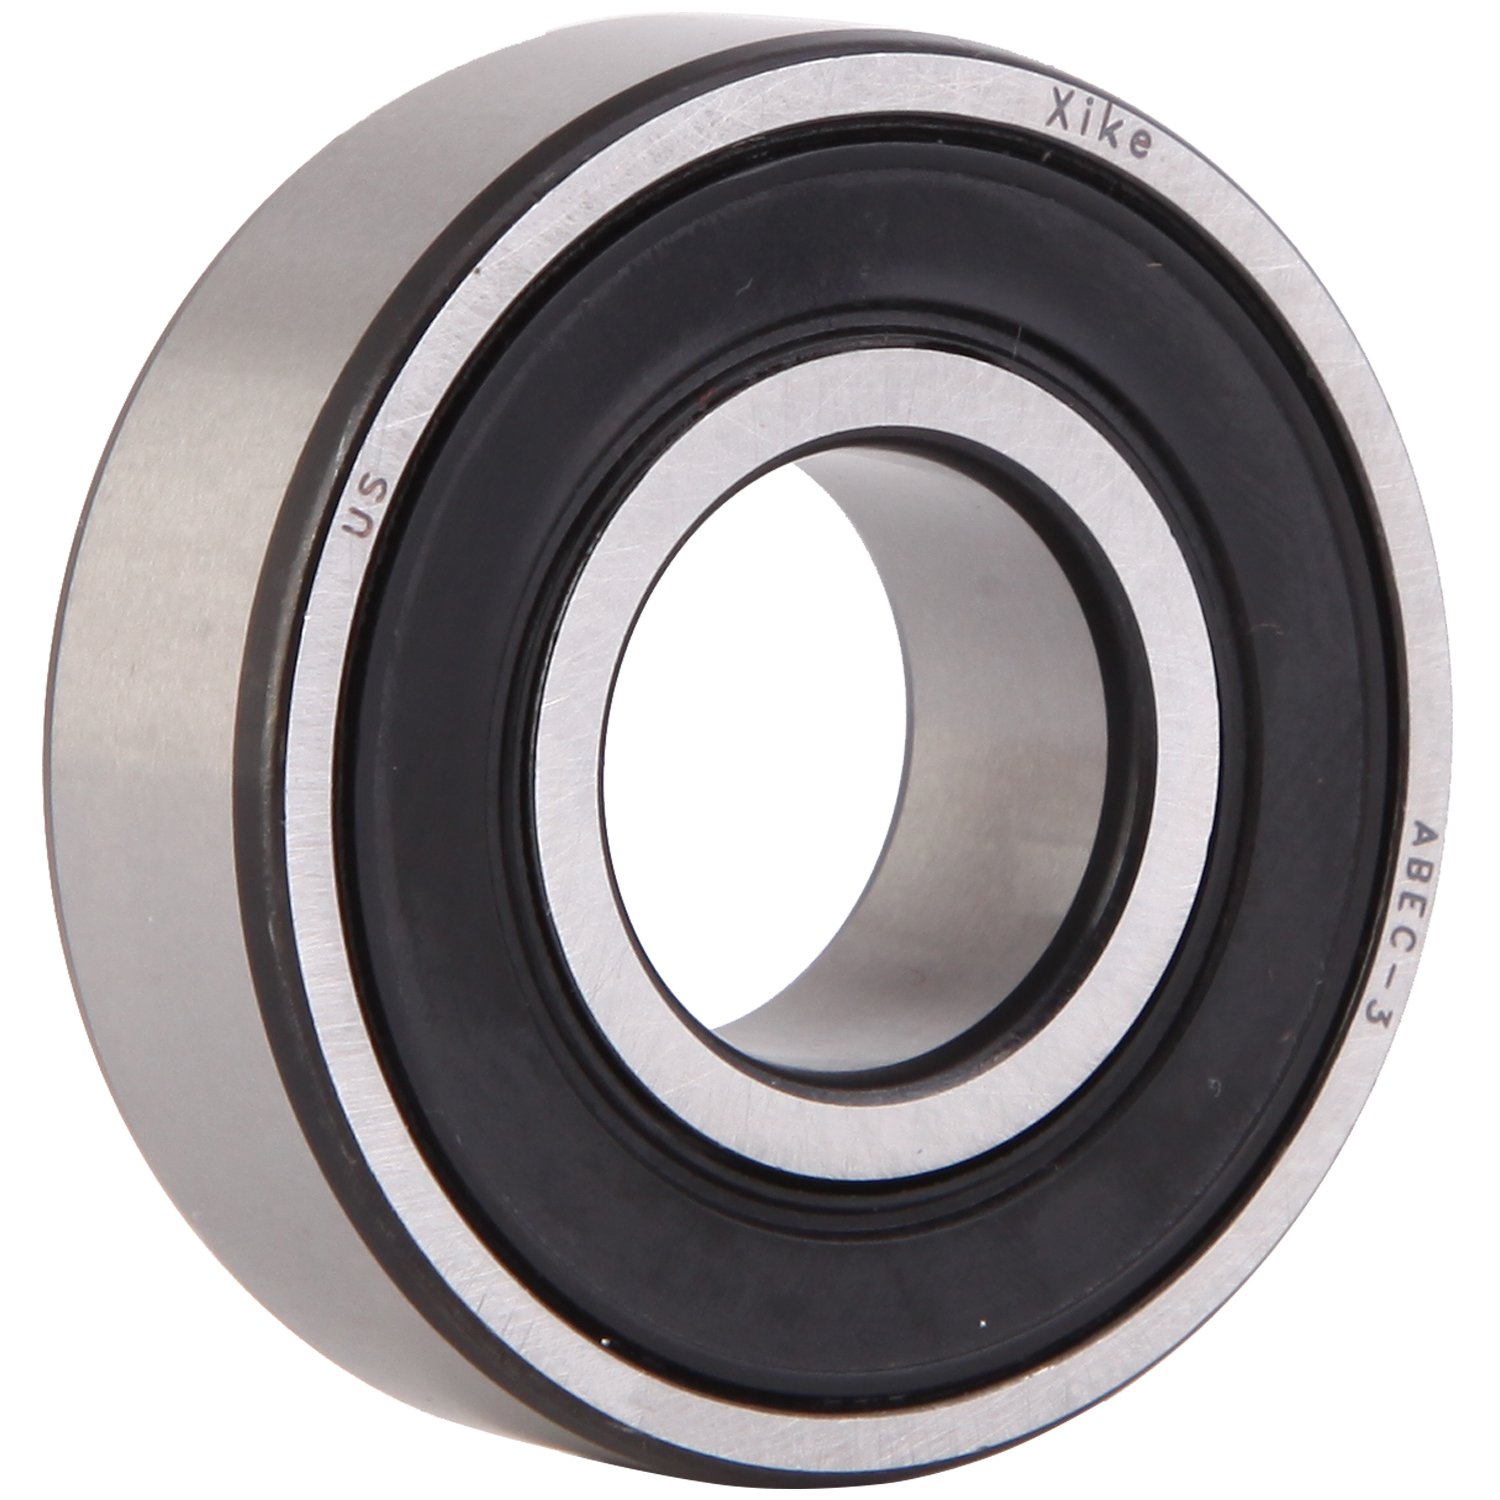 XiKe 2 Pack Precision Ball Bearing Replacement for Pentair Whisperflo Pool Pump, Rotate Quiet High Speed and Durable.